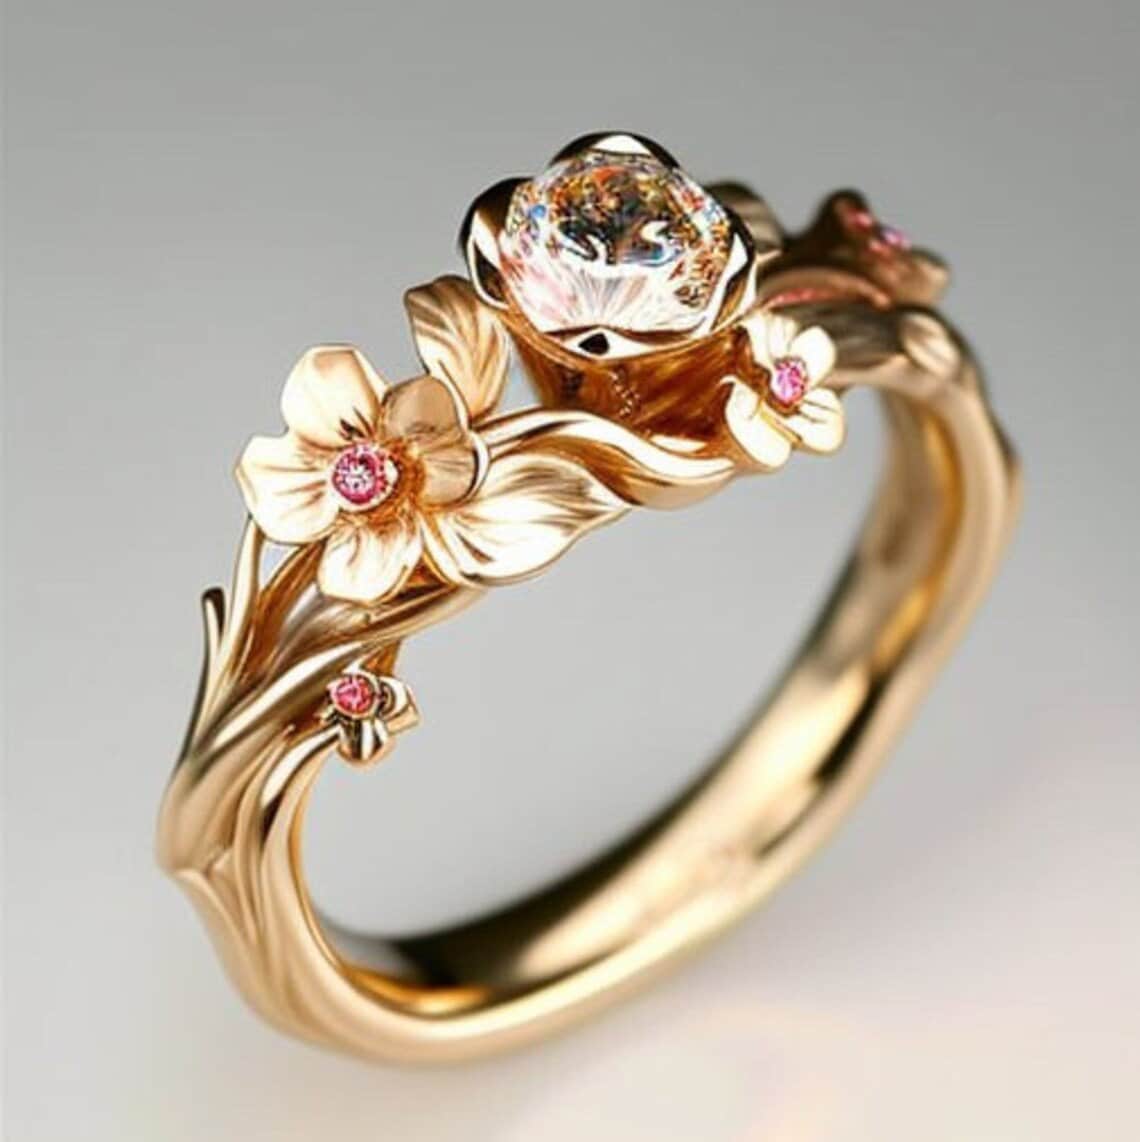 Dianna Rae Original Engagement Rings, Let your love BLOSSOM with a Dianna  Rae Original engagement ring! 🌷 Floral-inspired 🌷 Vintage-style 🌷  Custom-designed The Dianna Rae Custom Design